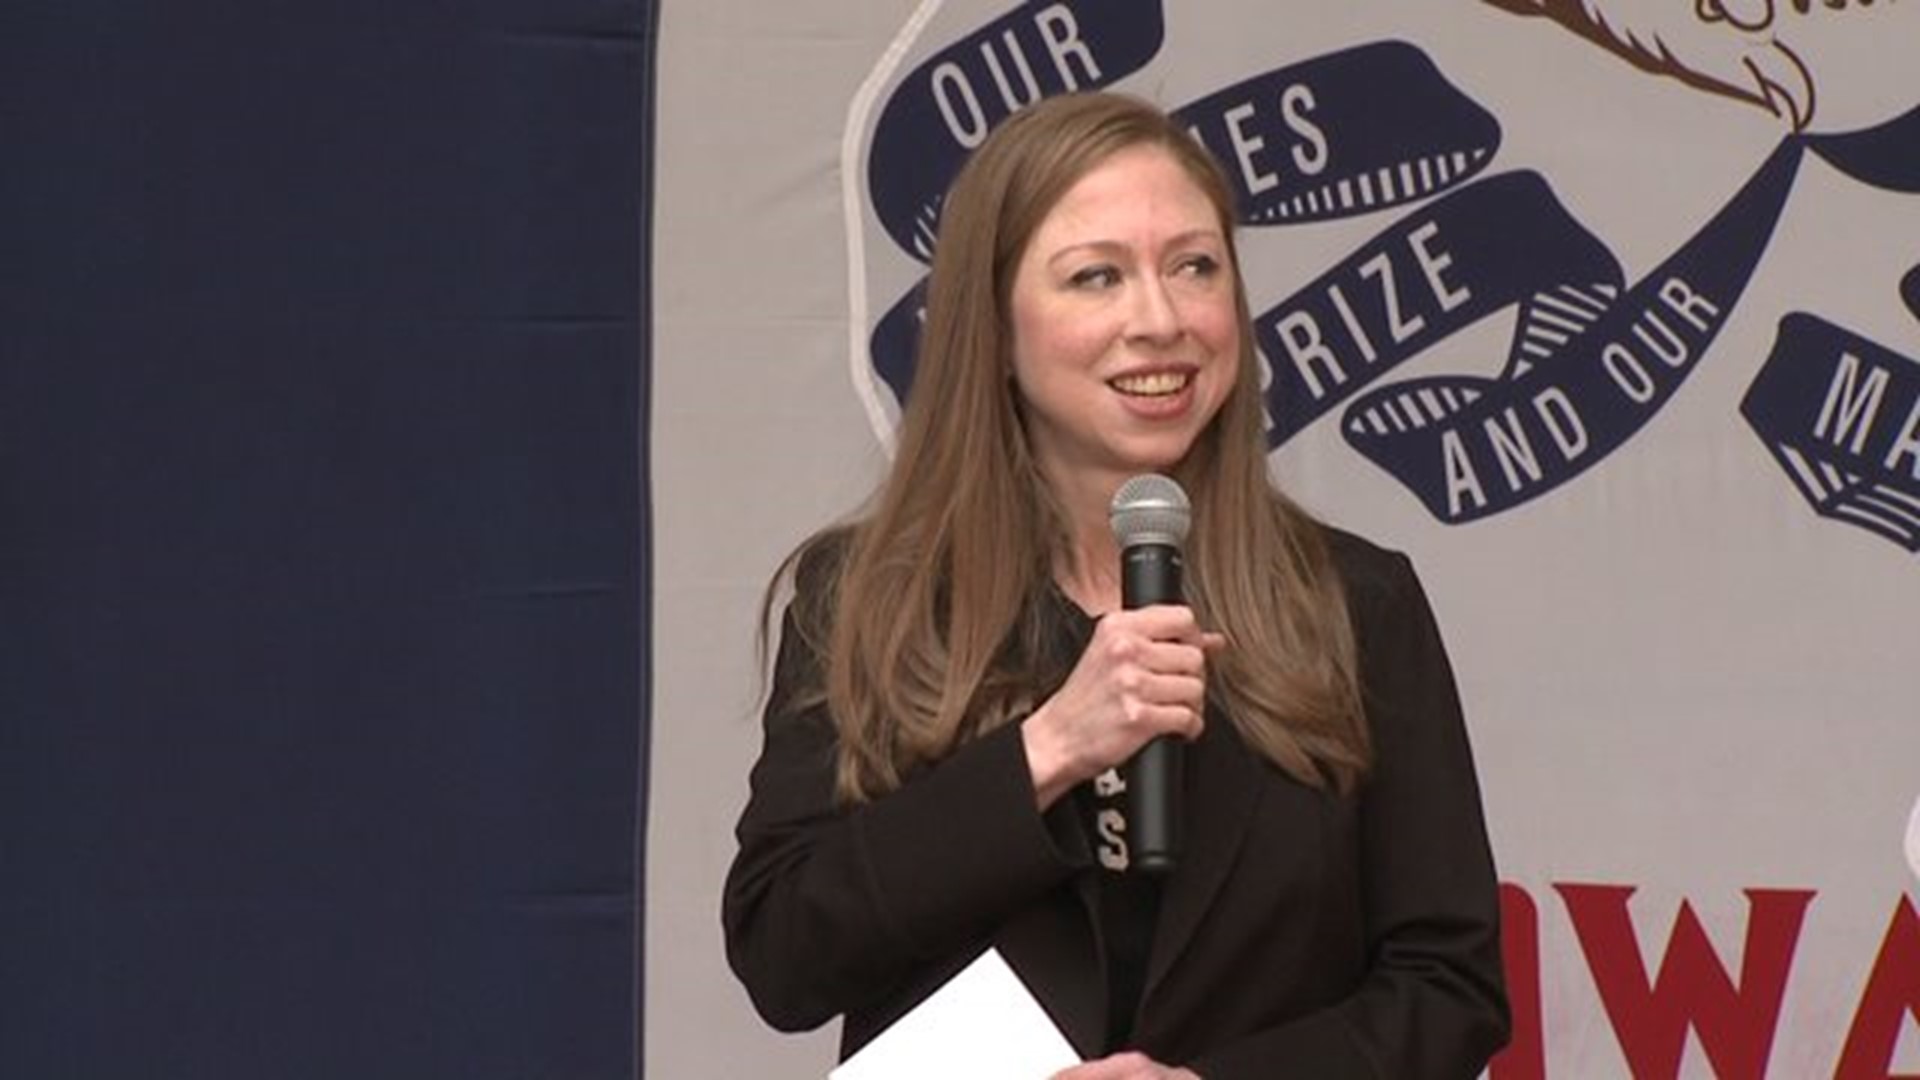 Chelsea Clinton stumps for mom in Dubuque